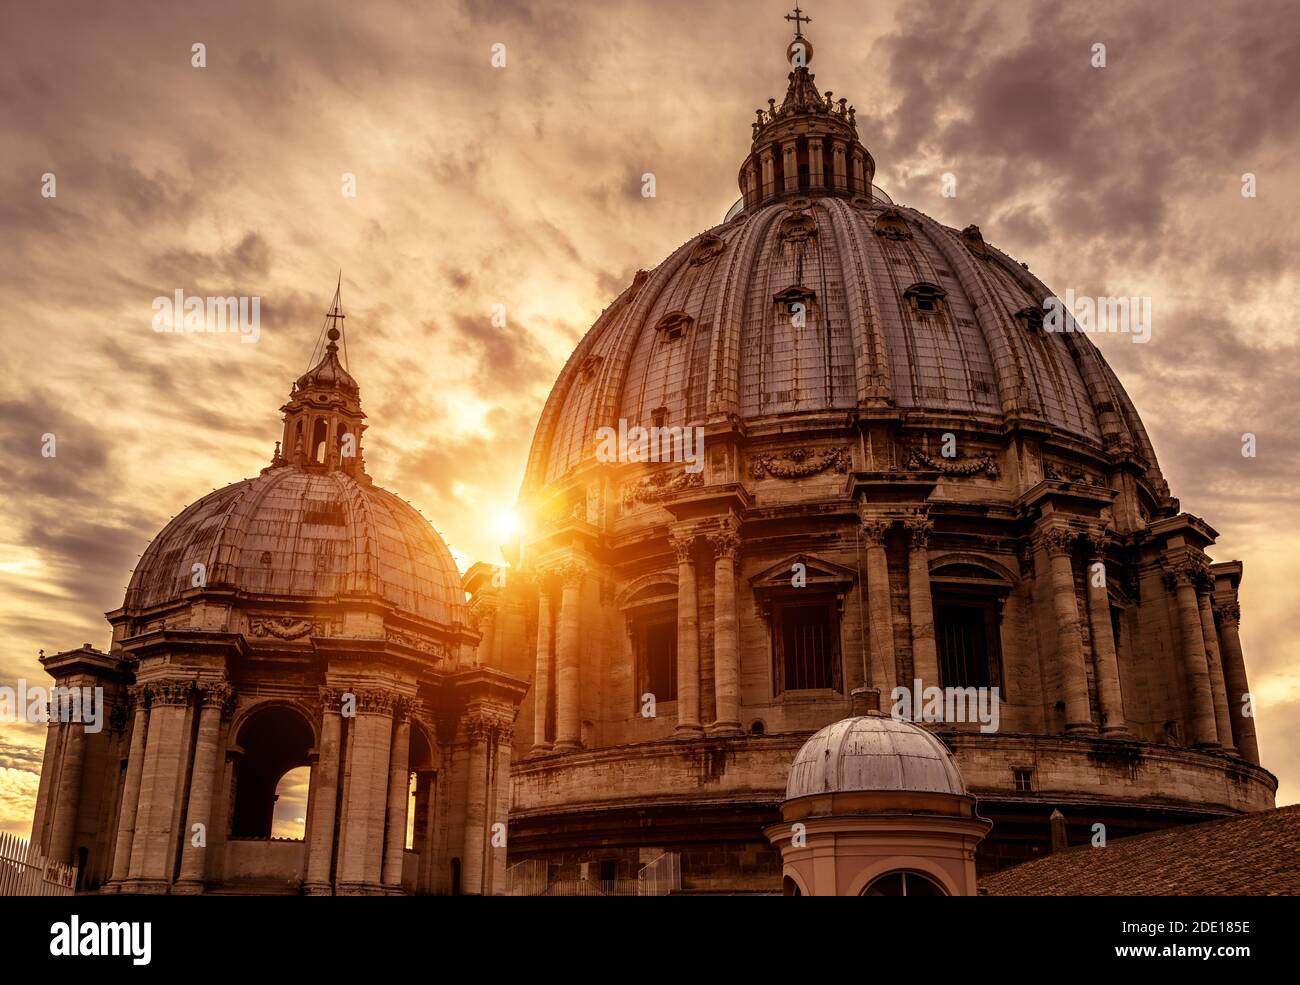 St Peter’s Basilica (San Pietro) at sunset in Vatican City, Rome, Italy. Great Saint Peter’s cathedral is famous landmark of Rome. Sunny view of Baroq Stock Photo